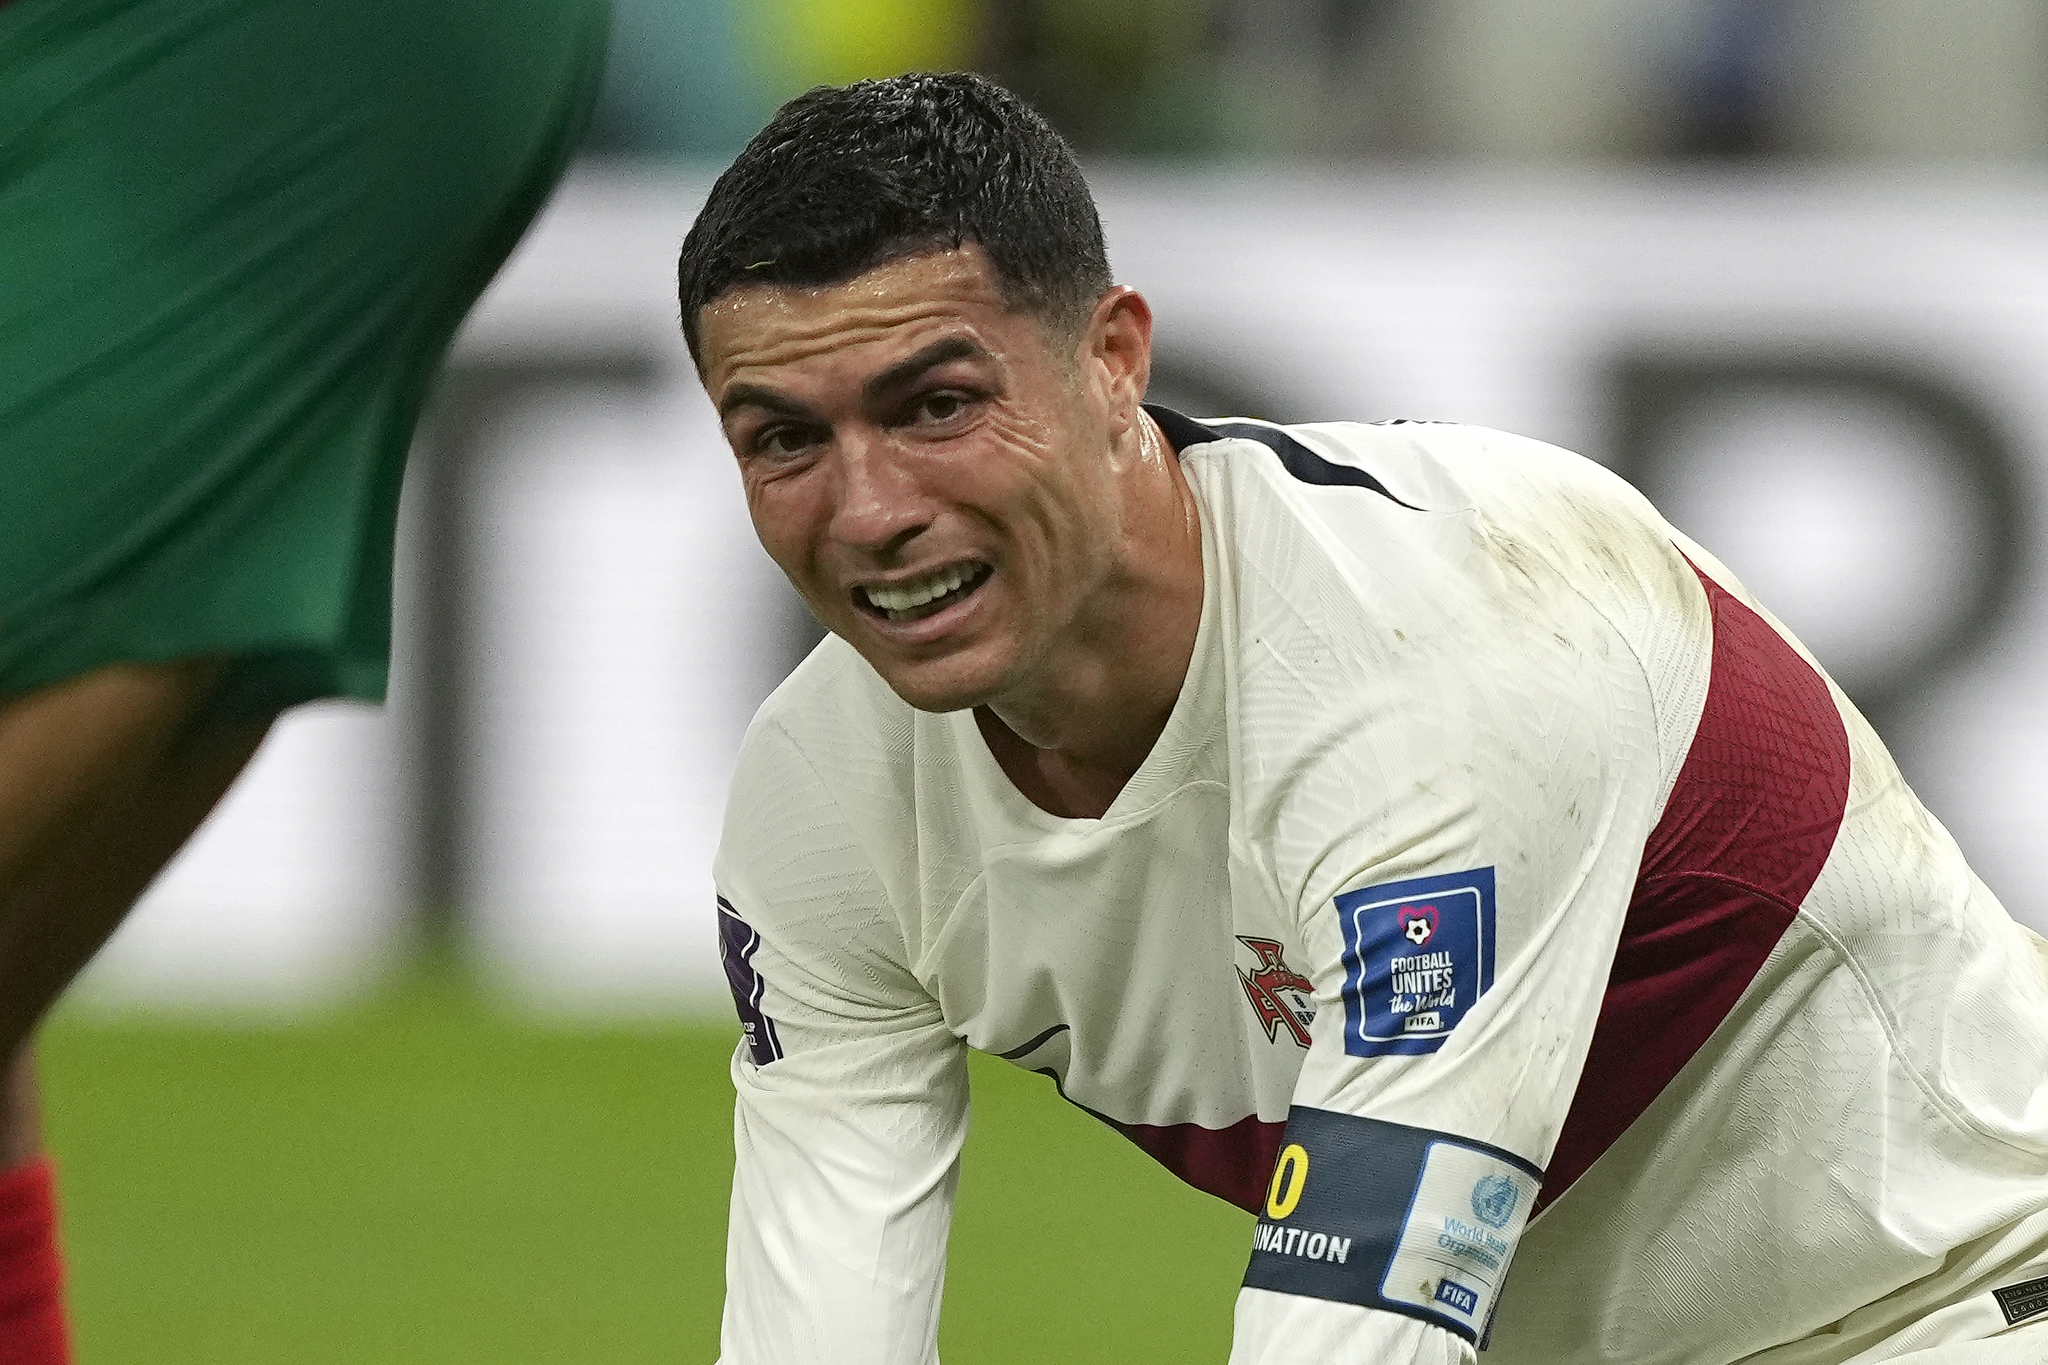 Portugal's Cristiano  lt;HIT gt;Ronaldo lt;/HIT gt; reacts after missing an opportunity to score during the World Cup quarterfinal soccer match between Morocco and Portugal, at Al Thumama Stadium in Doha, Qatar, Saturday, Dec. 10, 2022. (AP Photo/Martin Meissner)